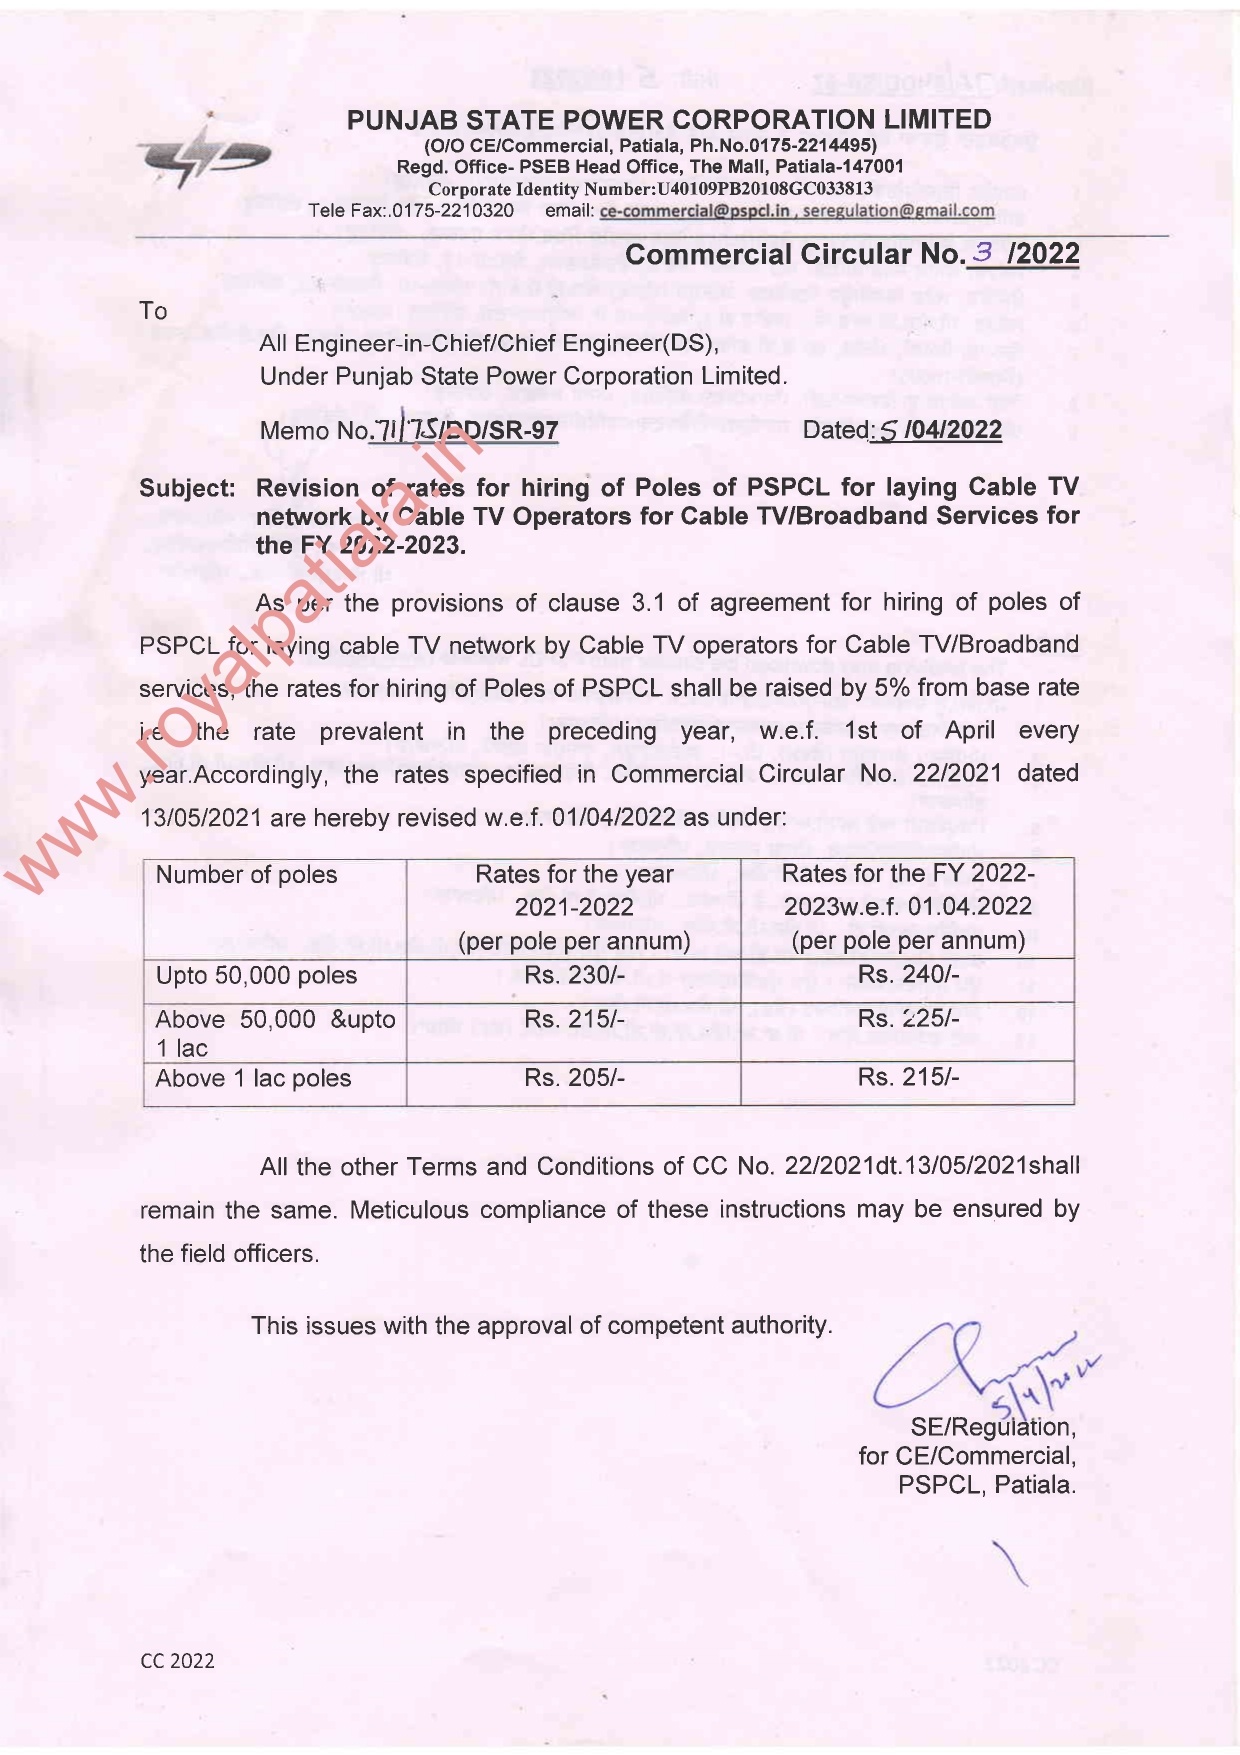 PSPCL increases 5 percent charges for hiring powercom poles